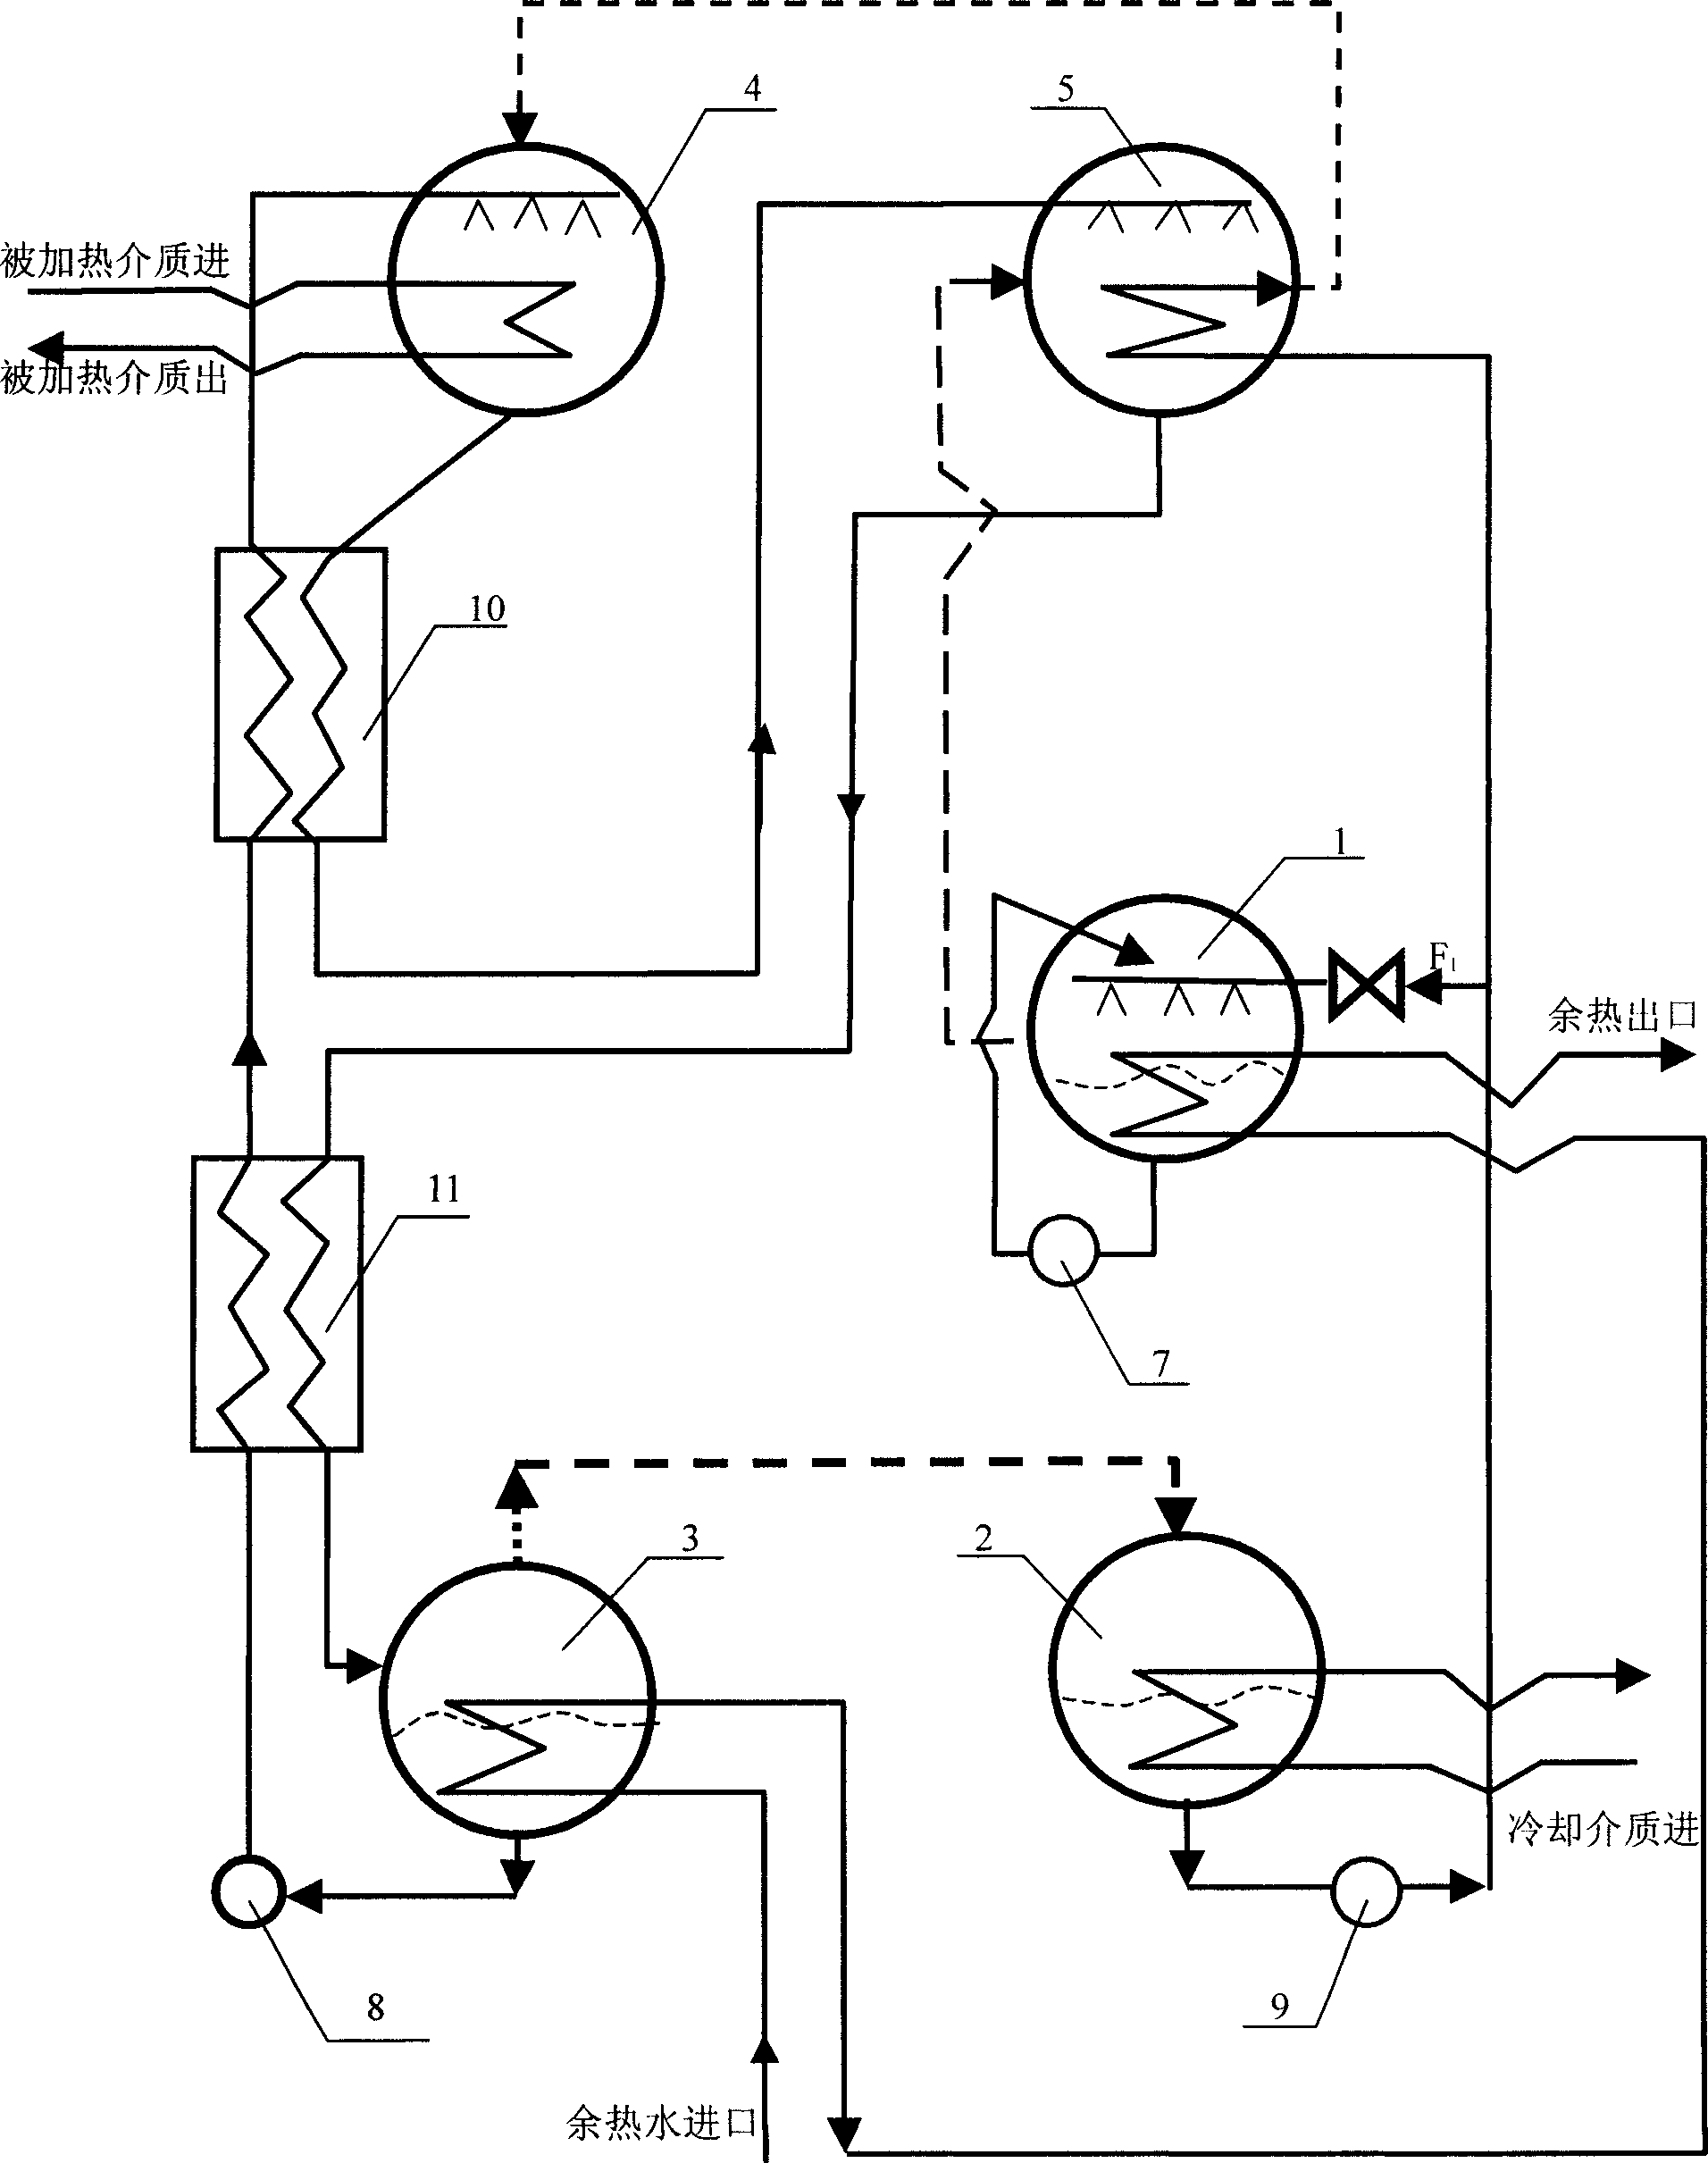 Two-stage and multi-stage type-II absorption heat transformer